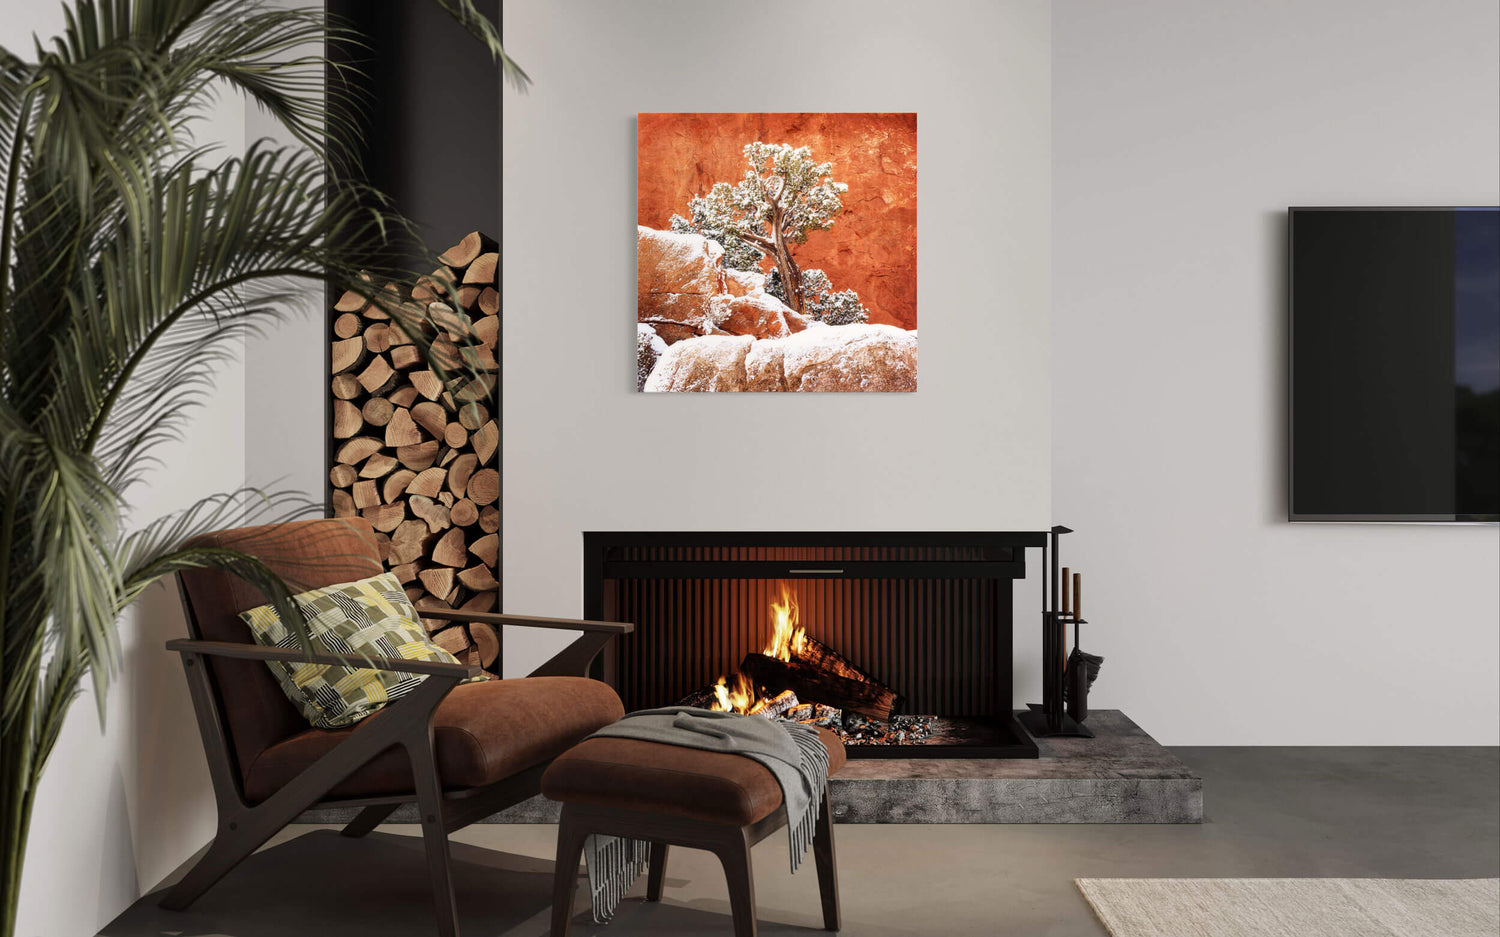 A Garden of the Gods picture from Colorado Springs hangs in a living room.